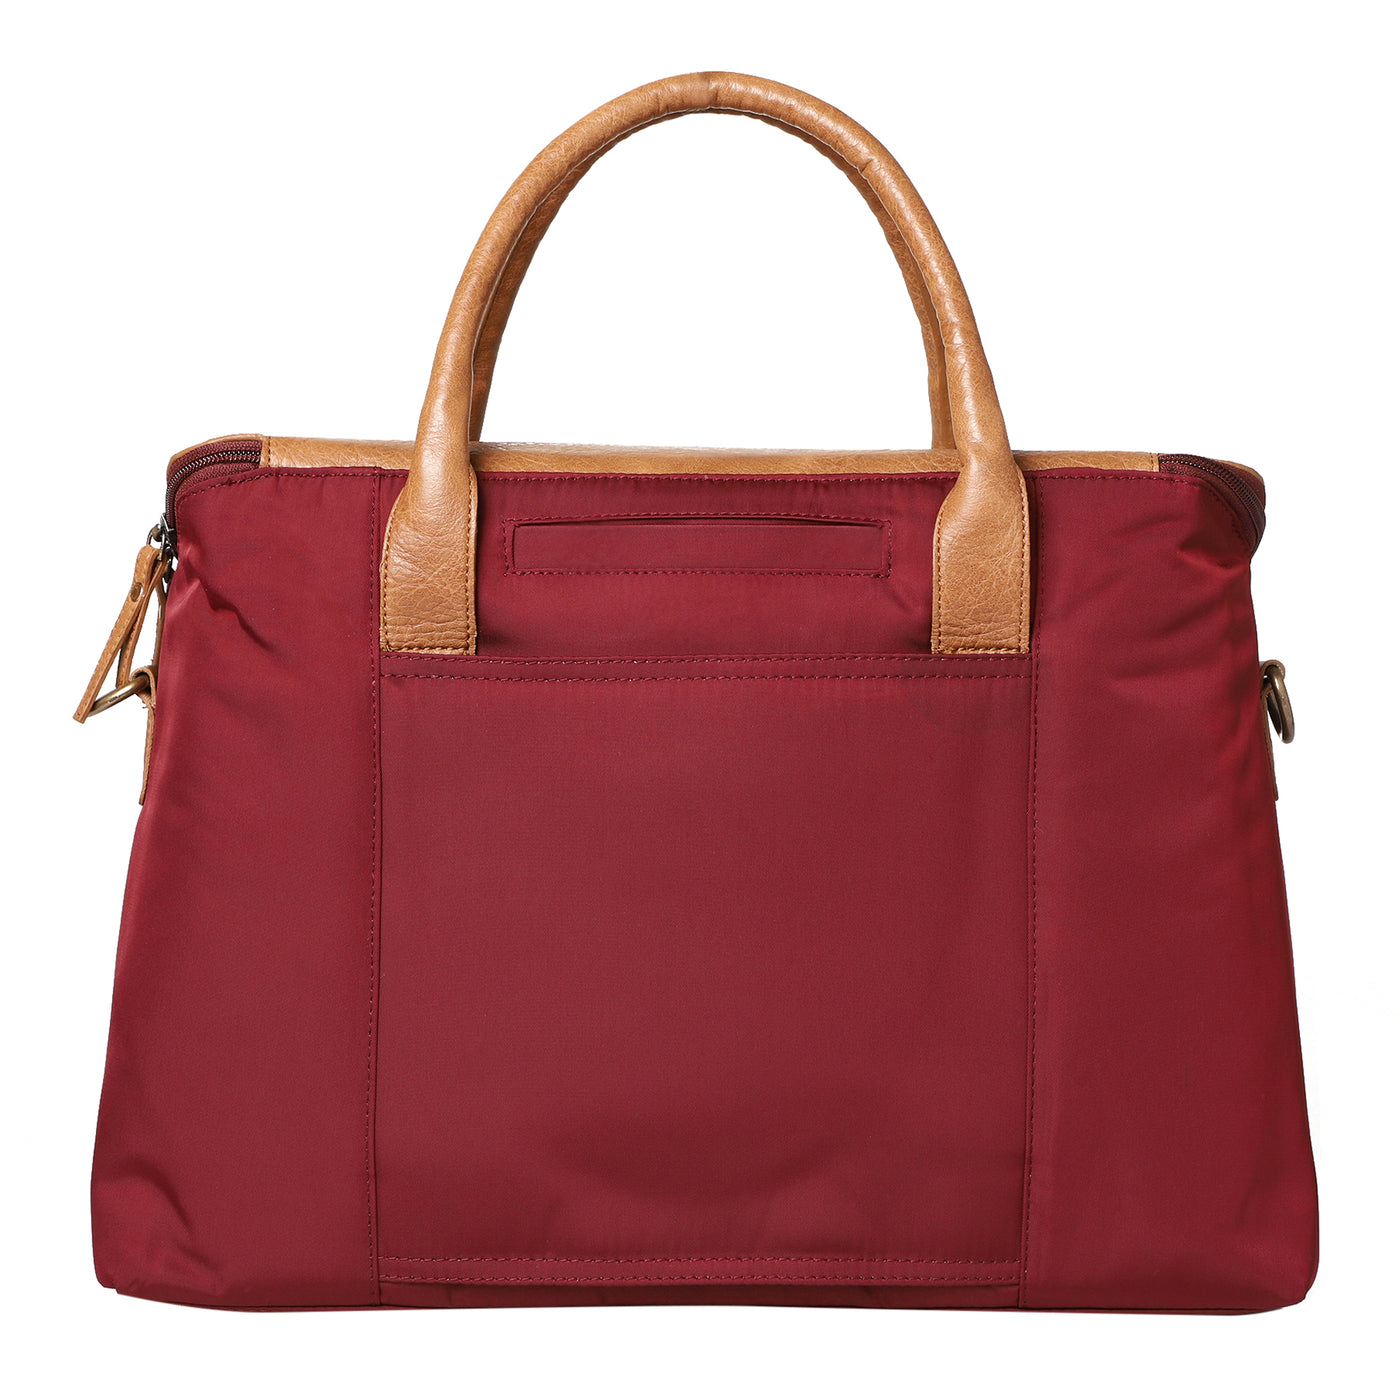 Mona B Unisex Messenger | Small Overnighter Bag for upto 14" Laptop/Mac Book/Tablet with Stylish Design: Ohio Wine